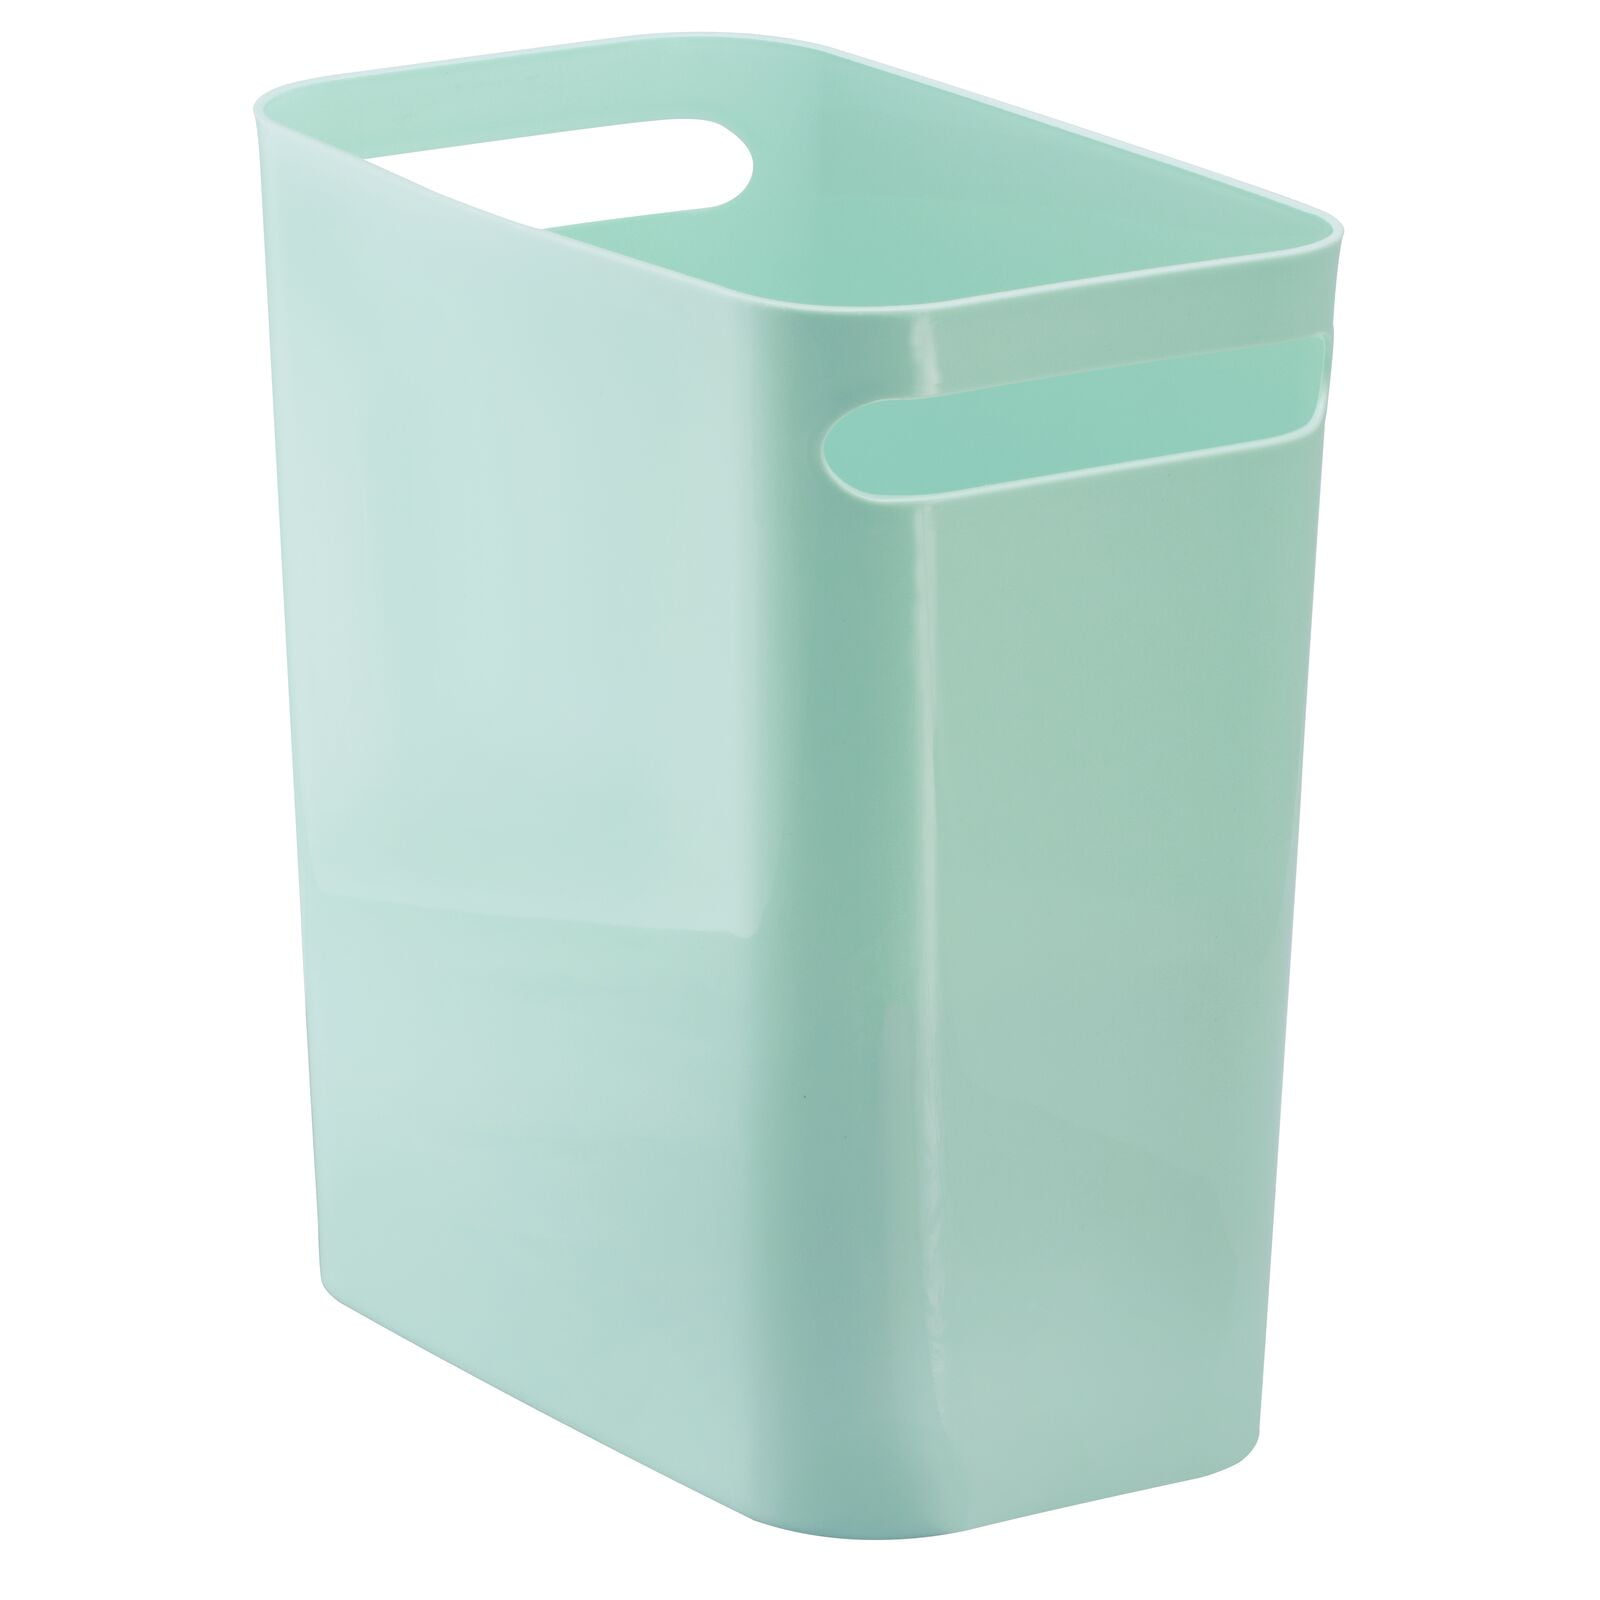 Personal Recycle Bin Trash Can Large Garbage Waste 30 Gallon Set Of 2 Containers 